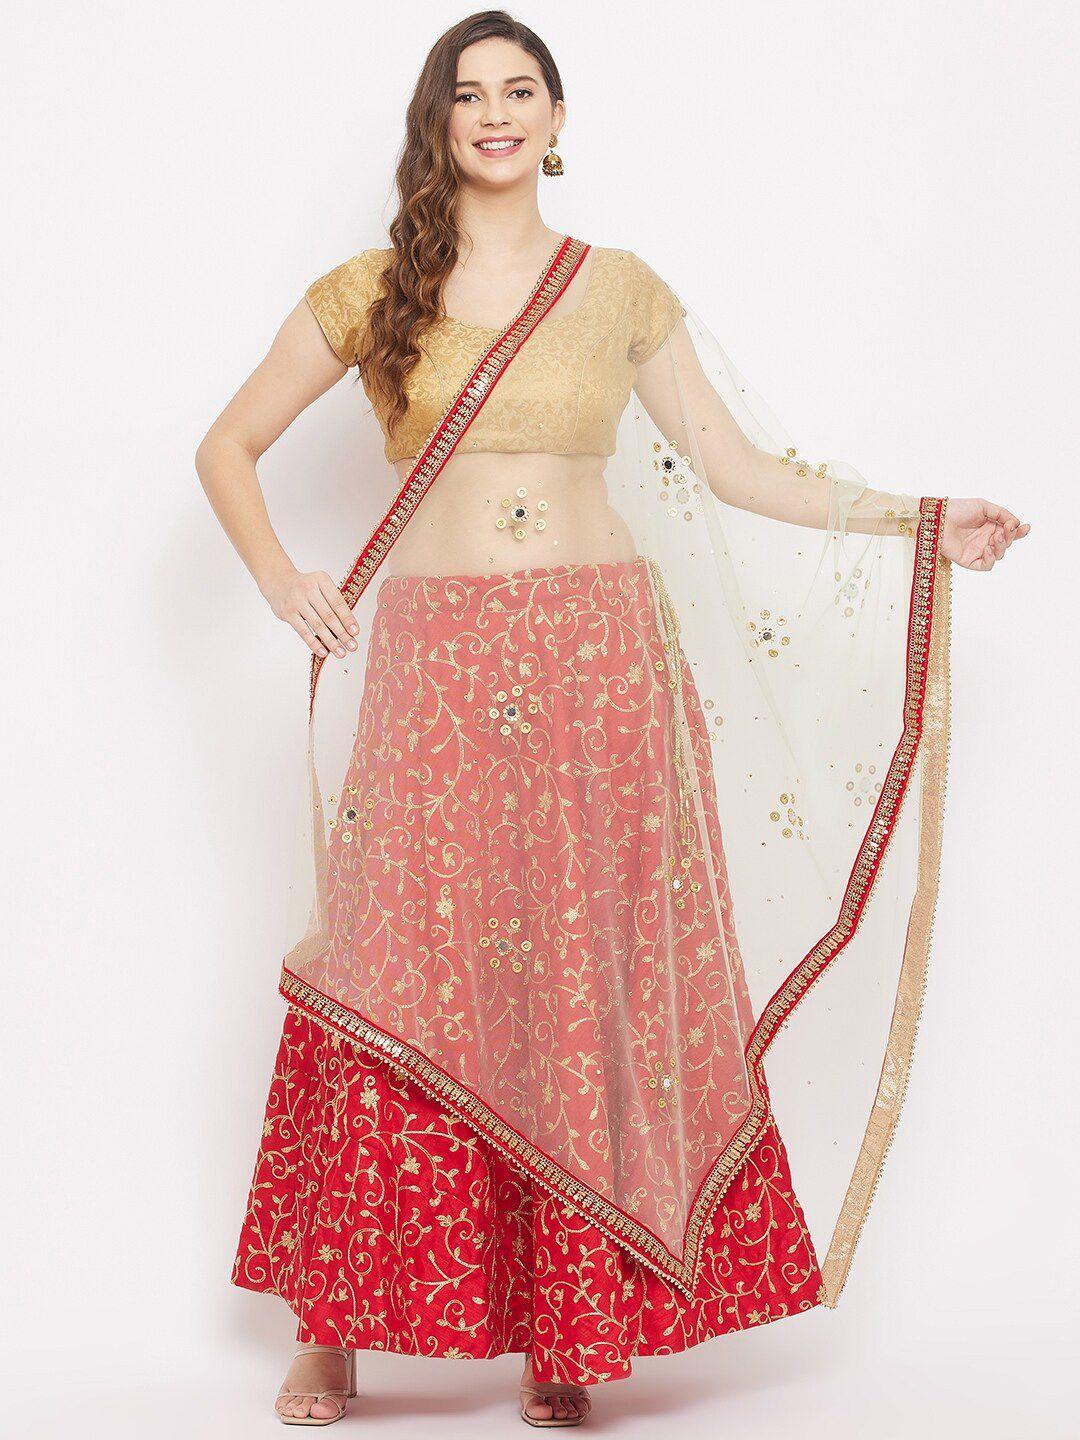 clora-creation-gold-toned-&-red-ethnic-motifs-embroidered-dupatta-with-beads-and-stones